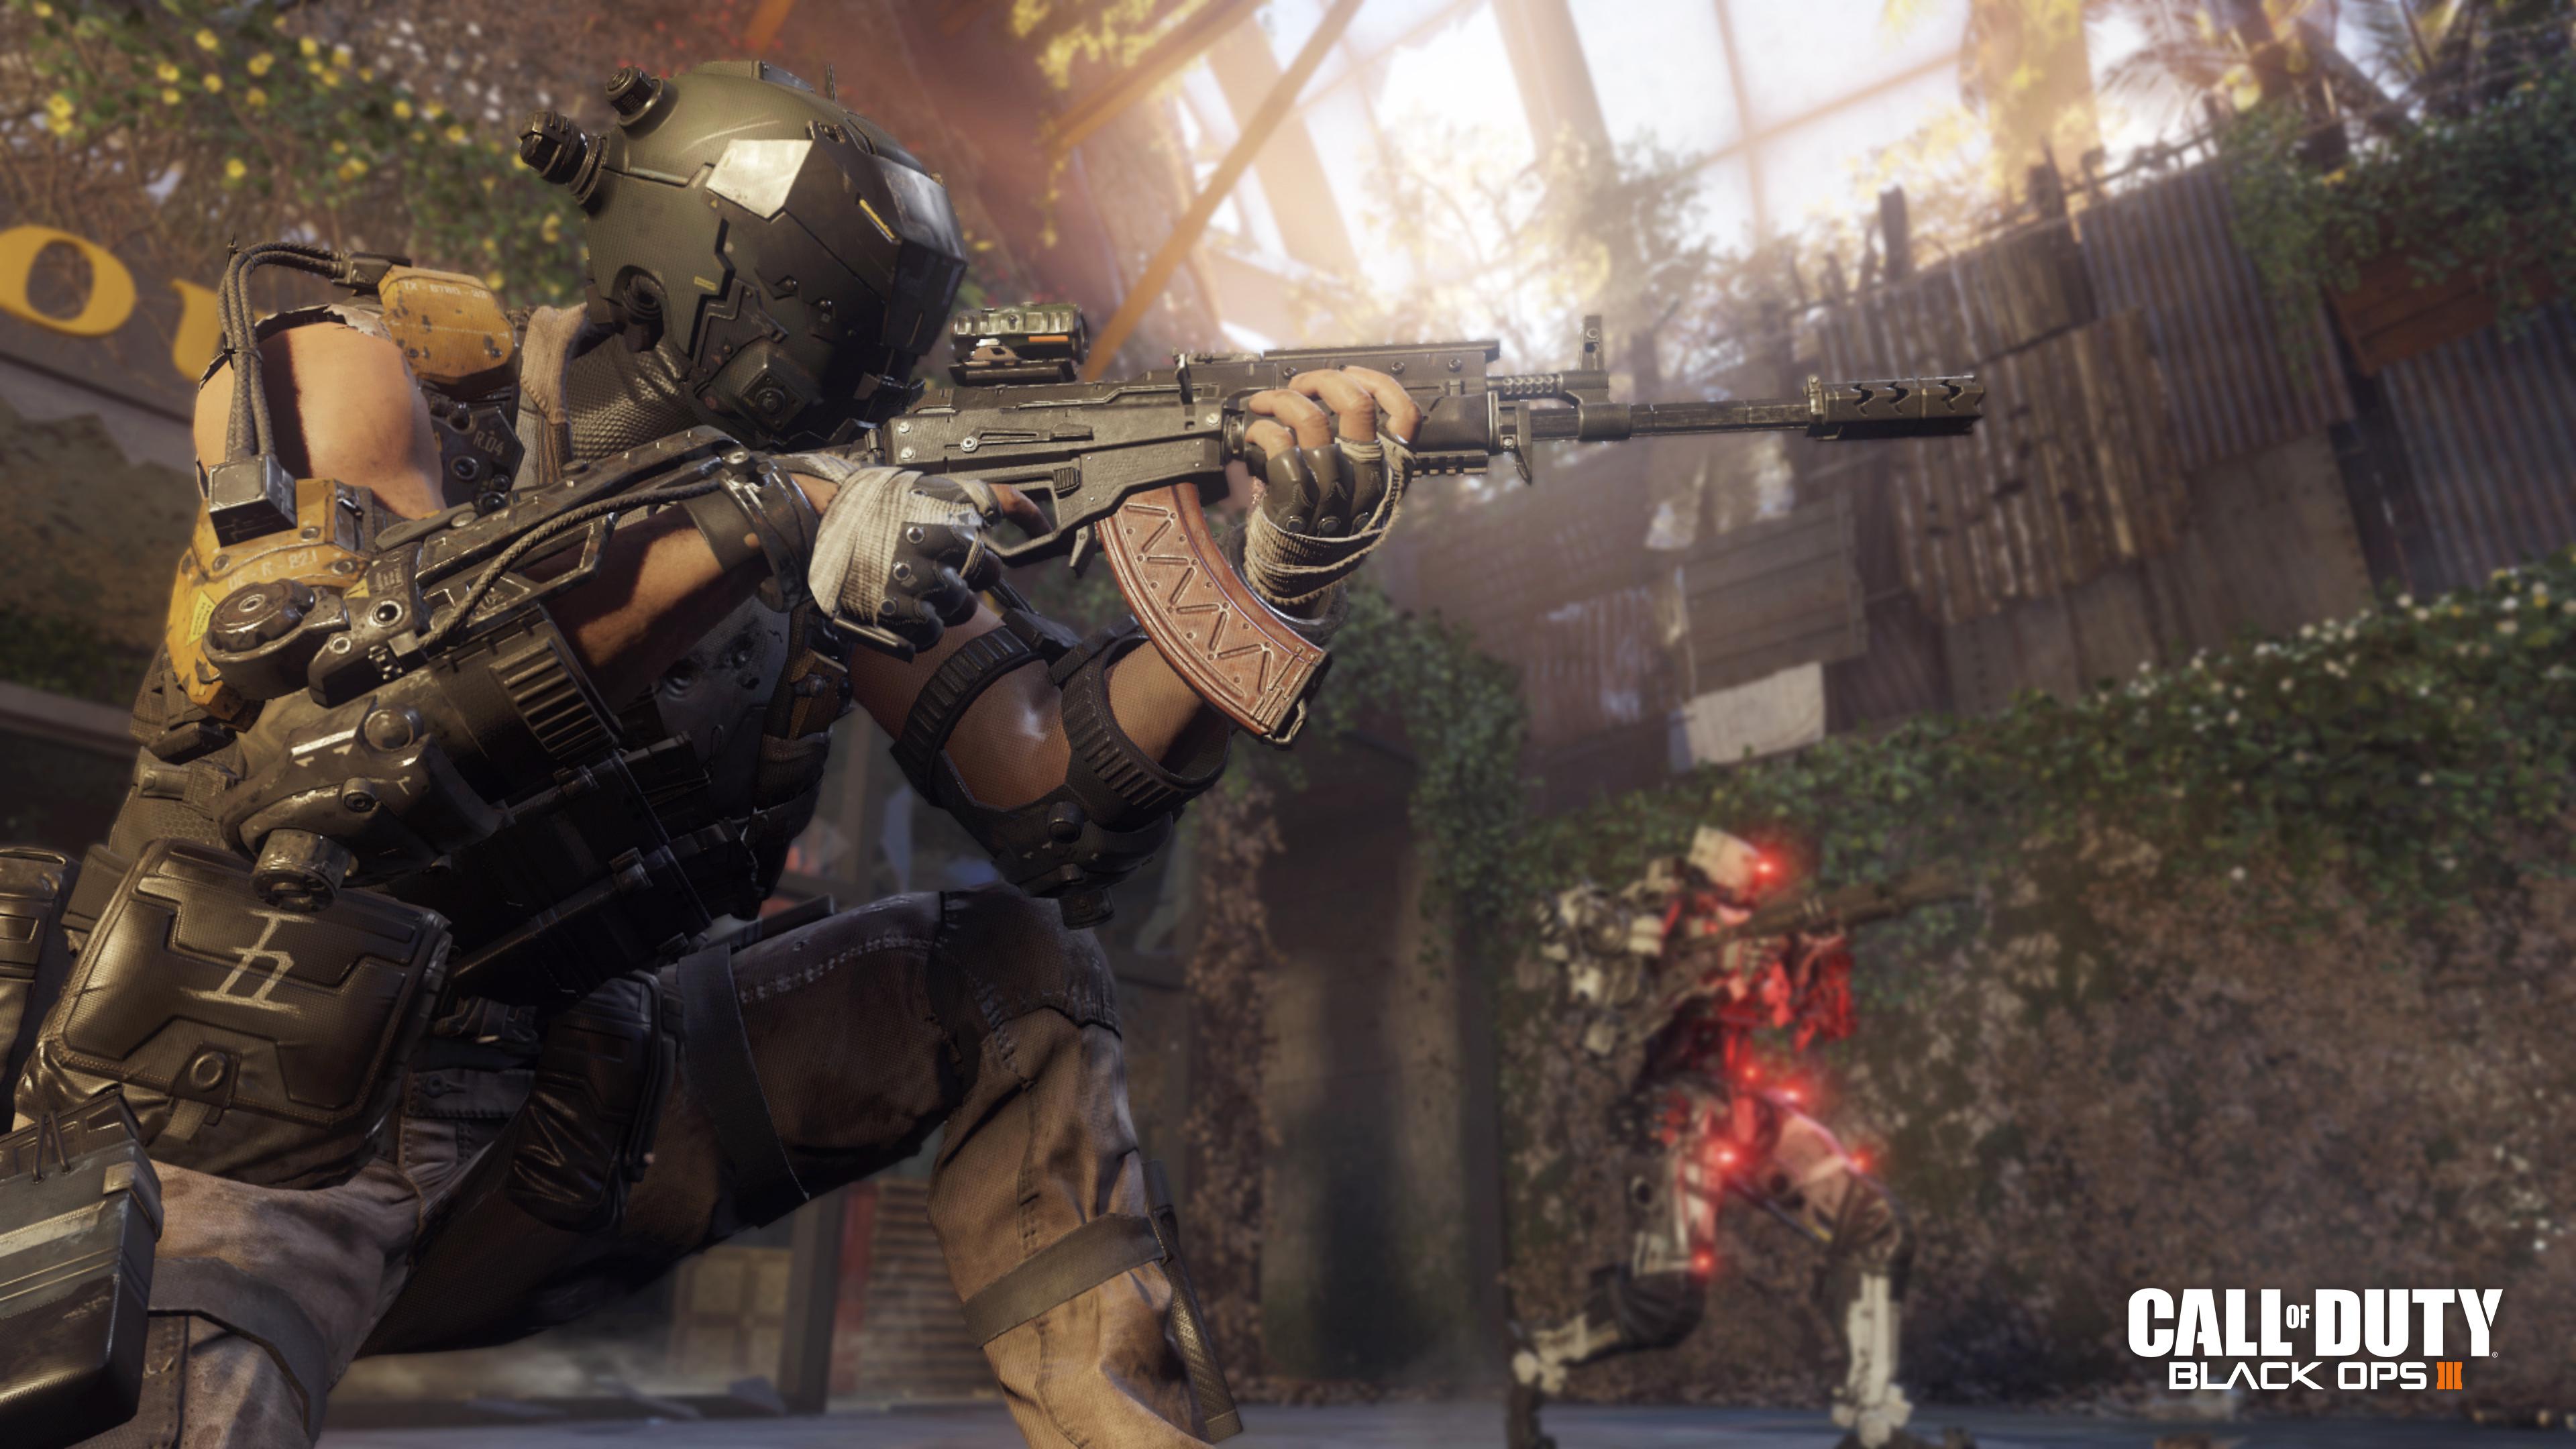 'Call of Duty: Black Ops III' screens campaign